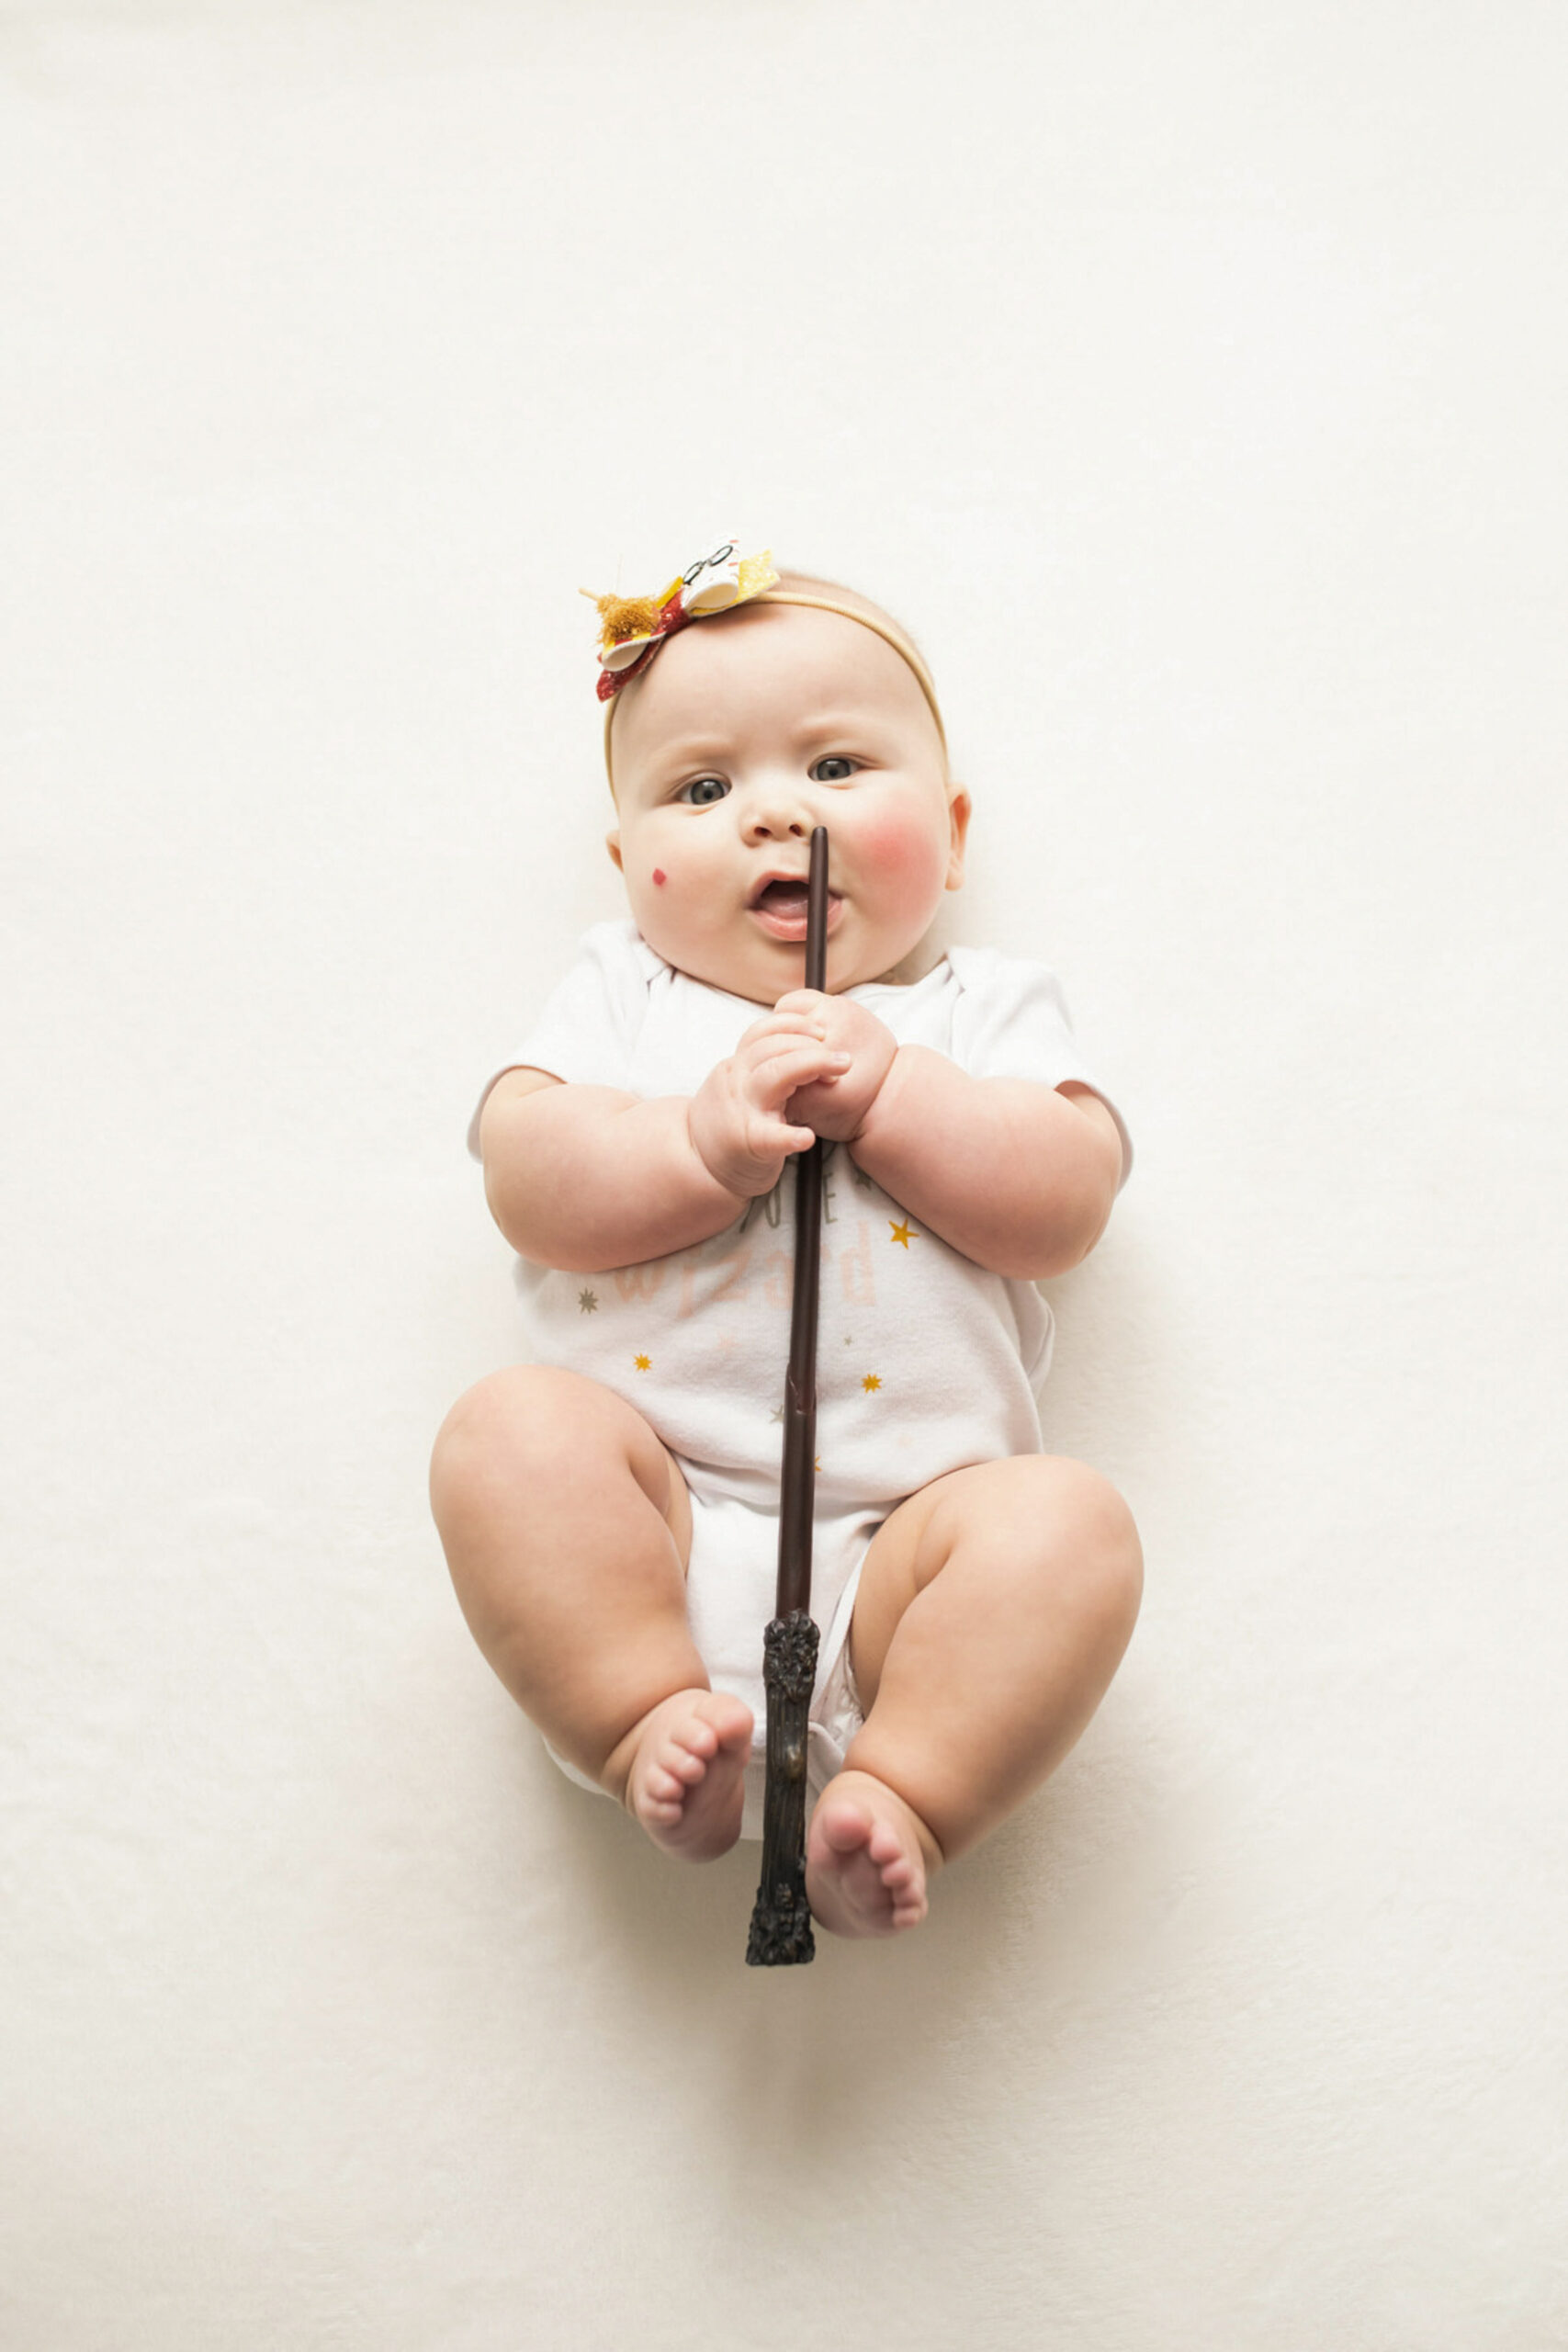 Harry Potter theme six month baby girl during family photos